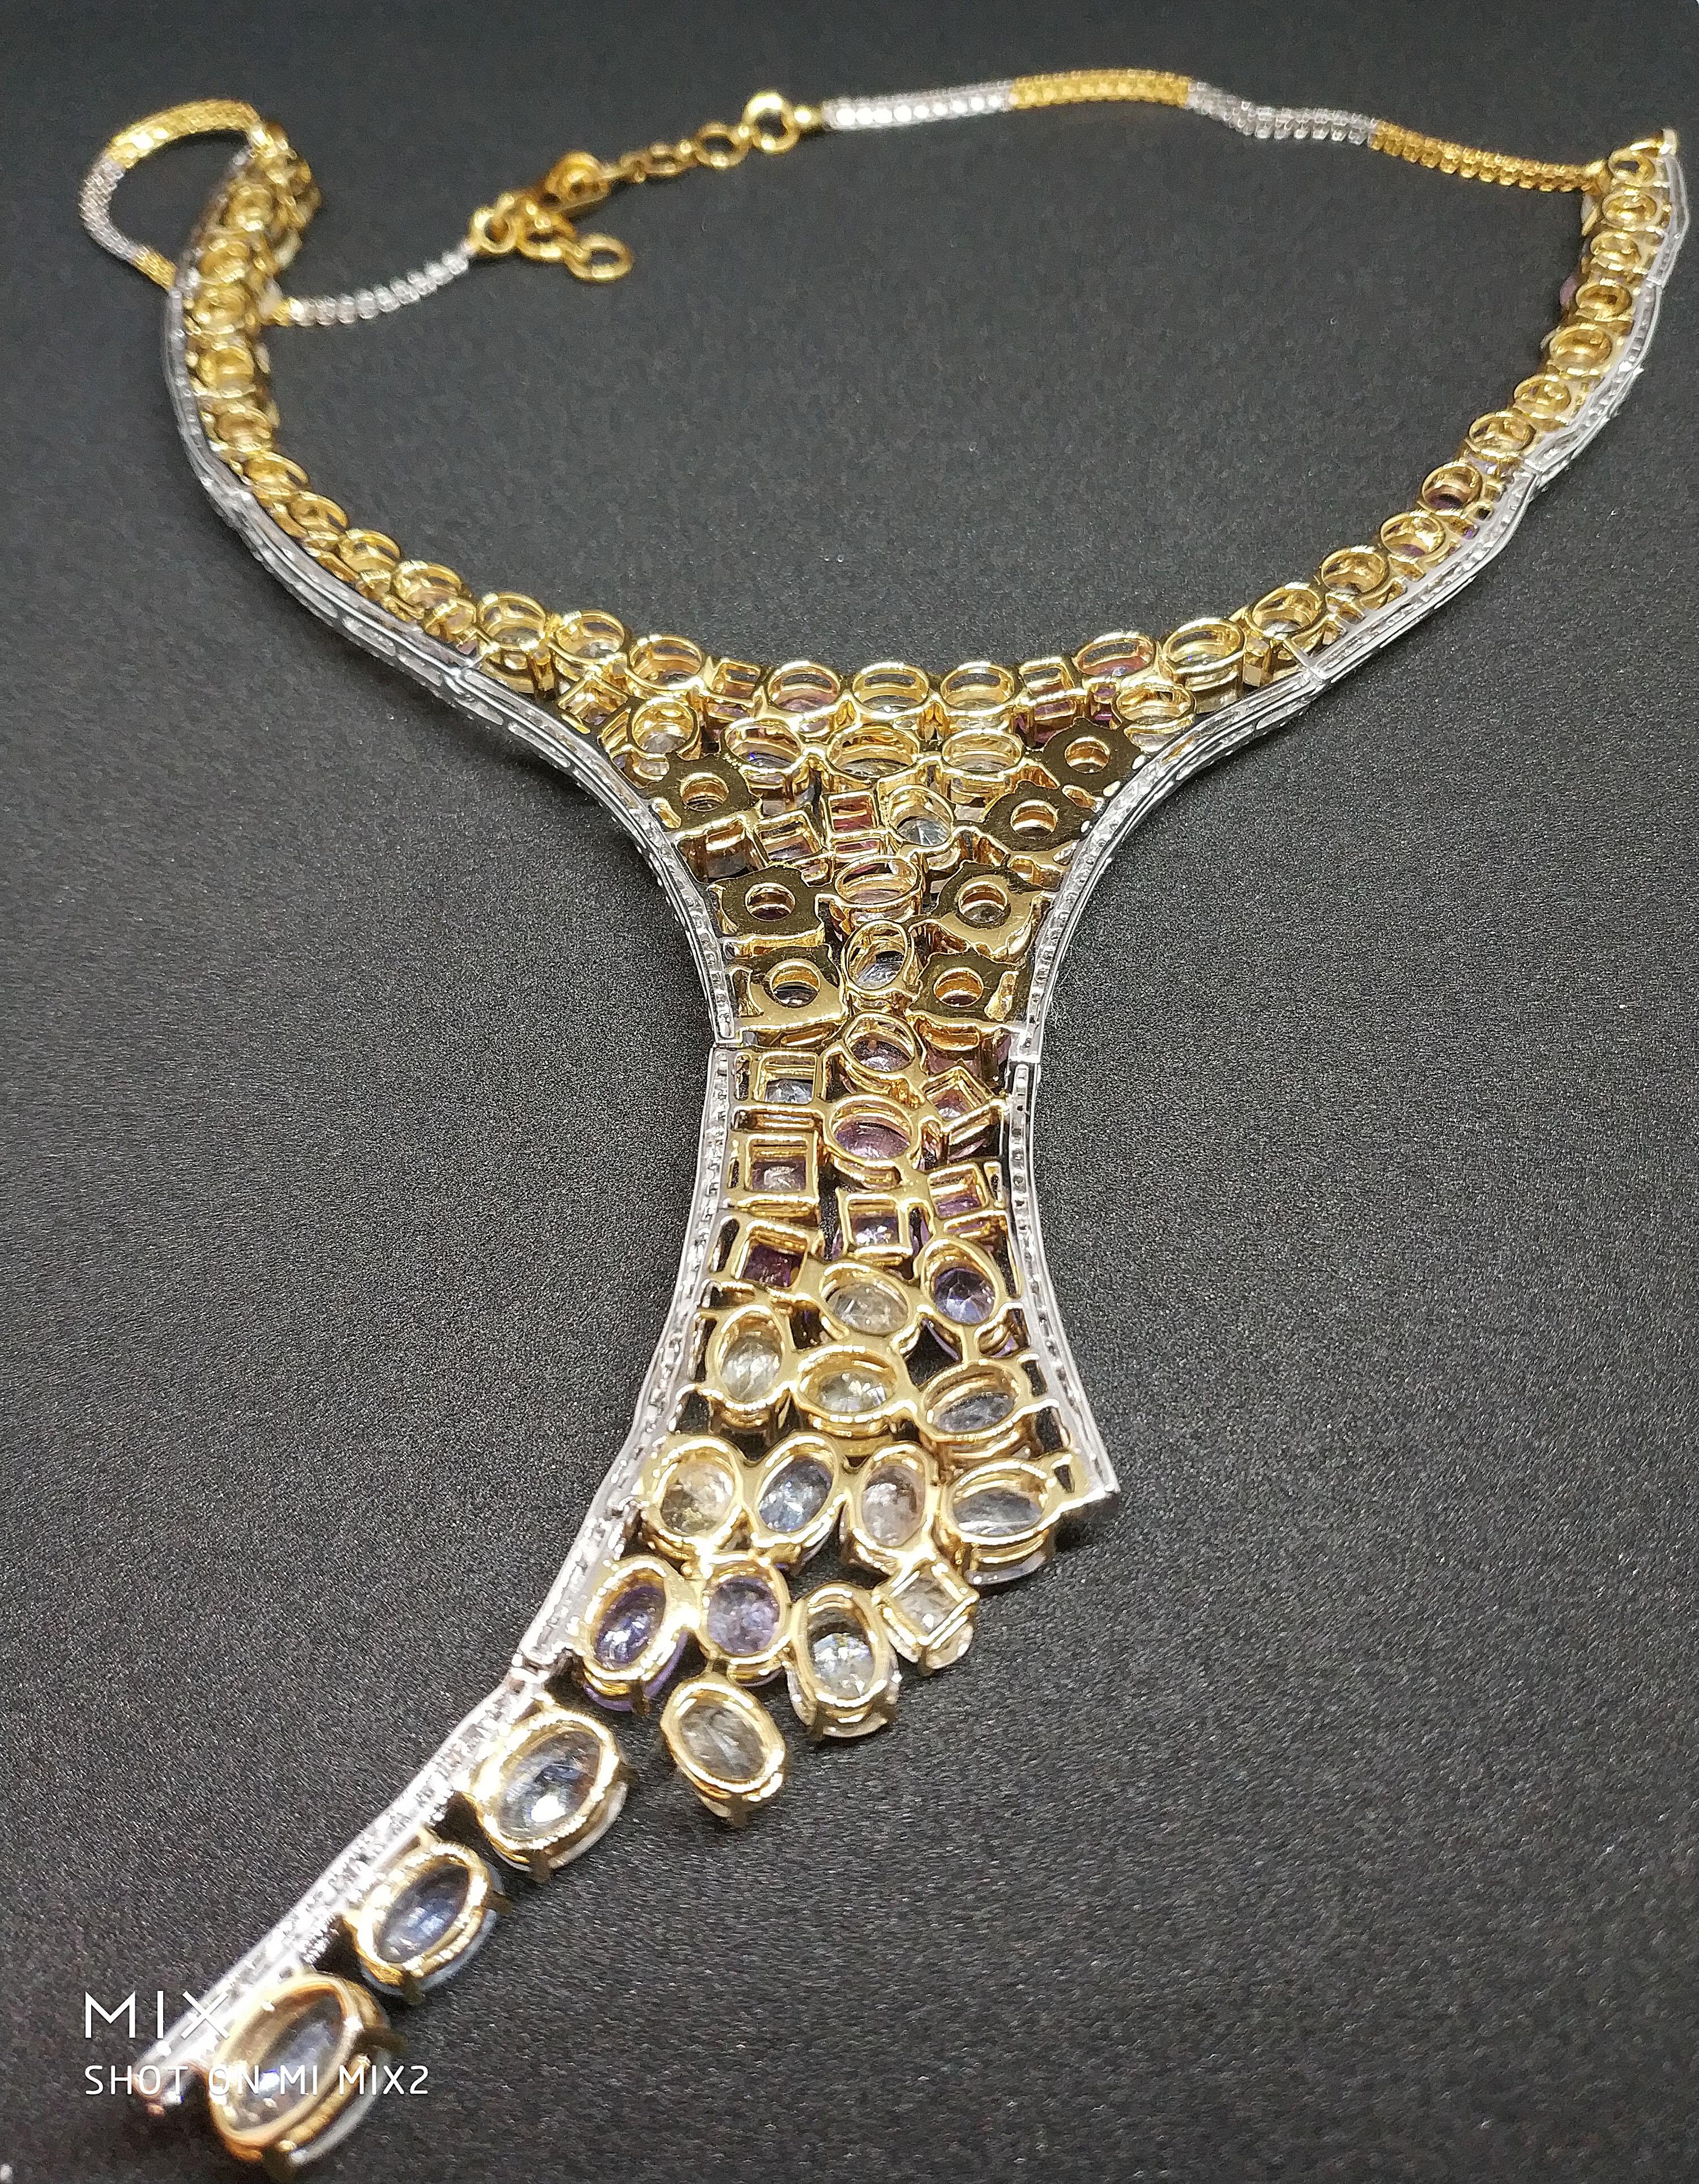 113 Carat Multicolored Sapphire and Diamond Necklace in Hourglass Design For Sale 6